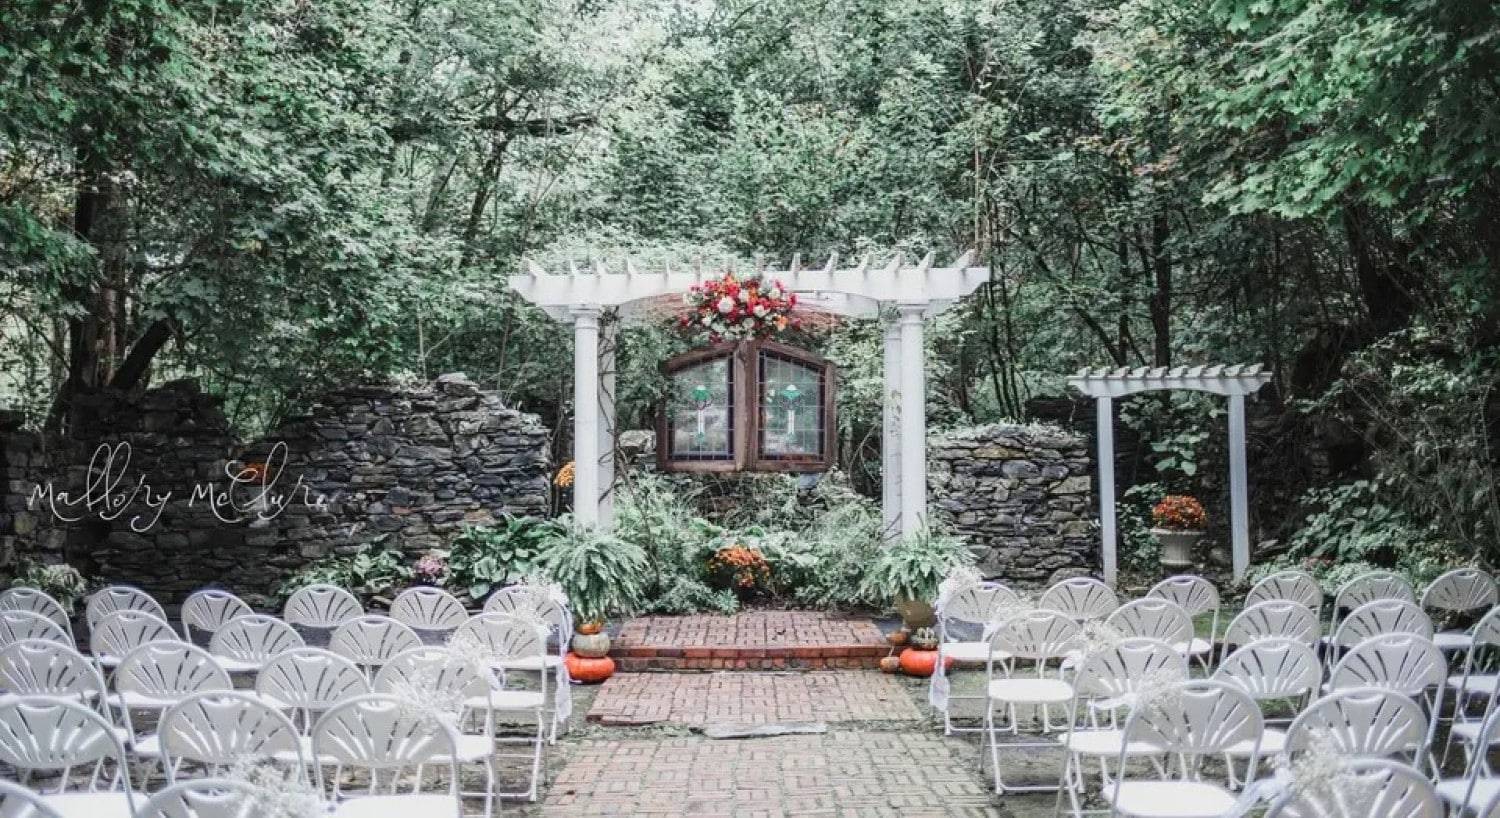 A gorgeous white pergola and chairs set up for a wedding, set among towering trees and green landscaping